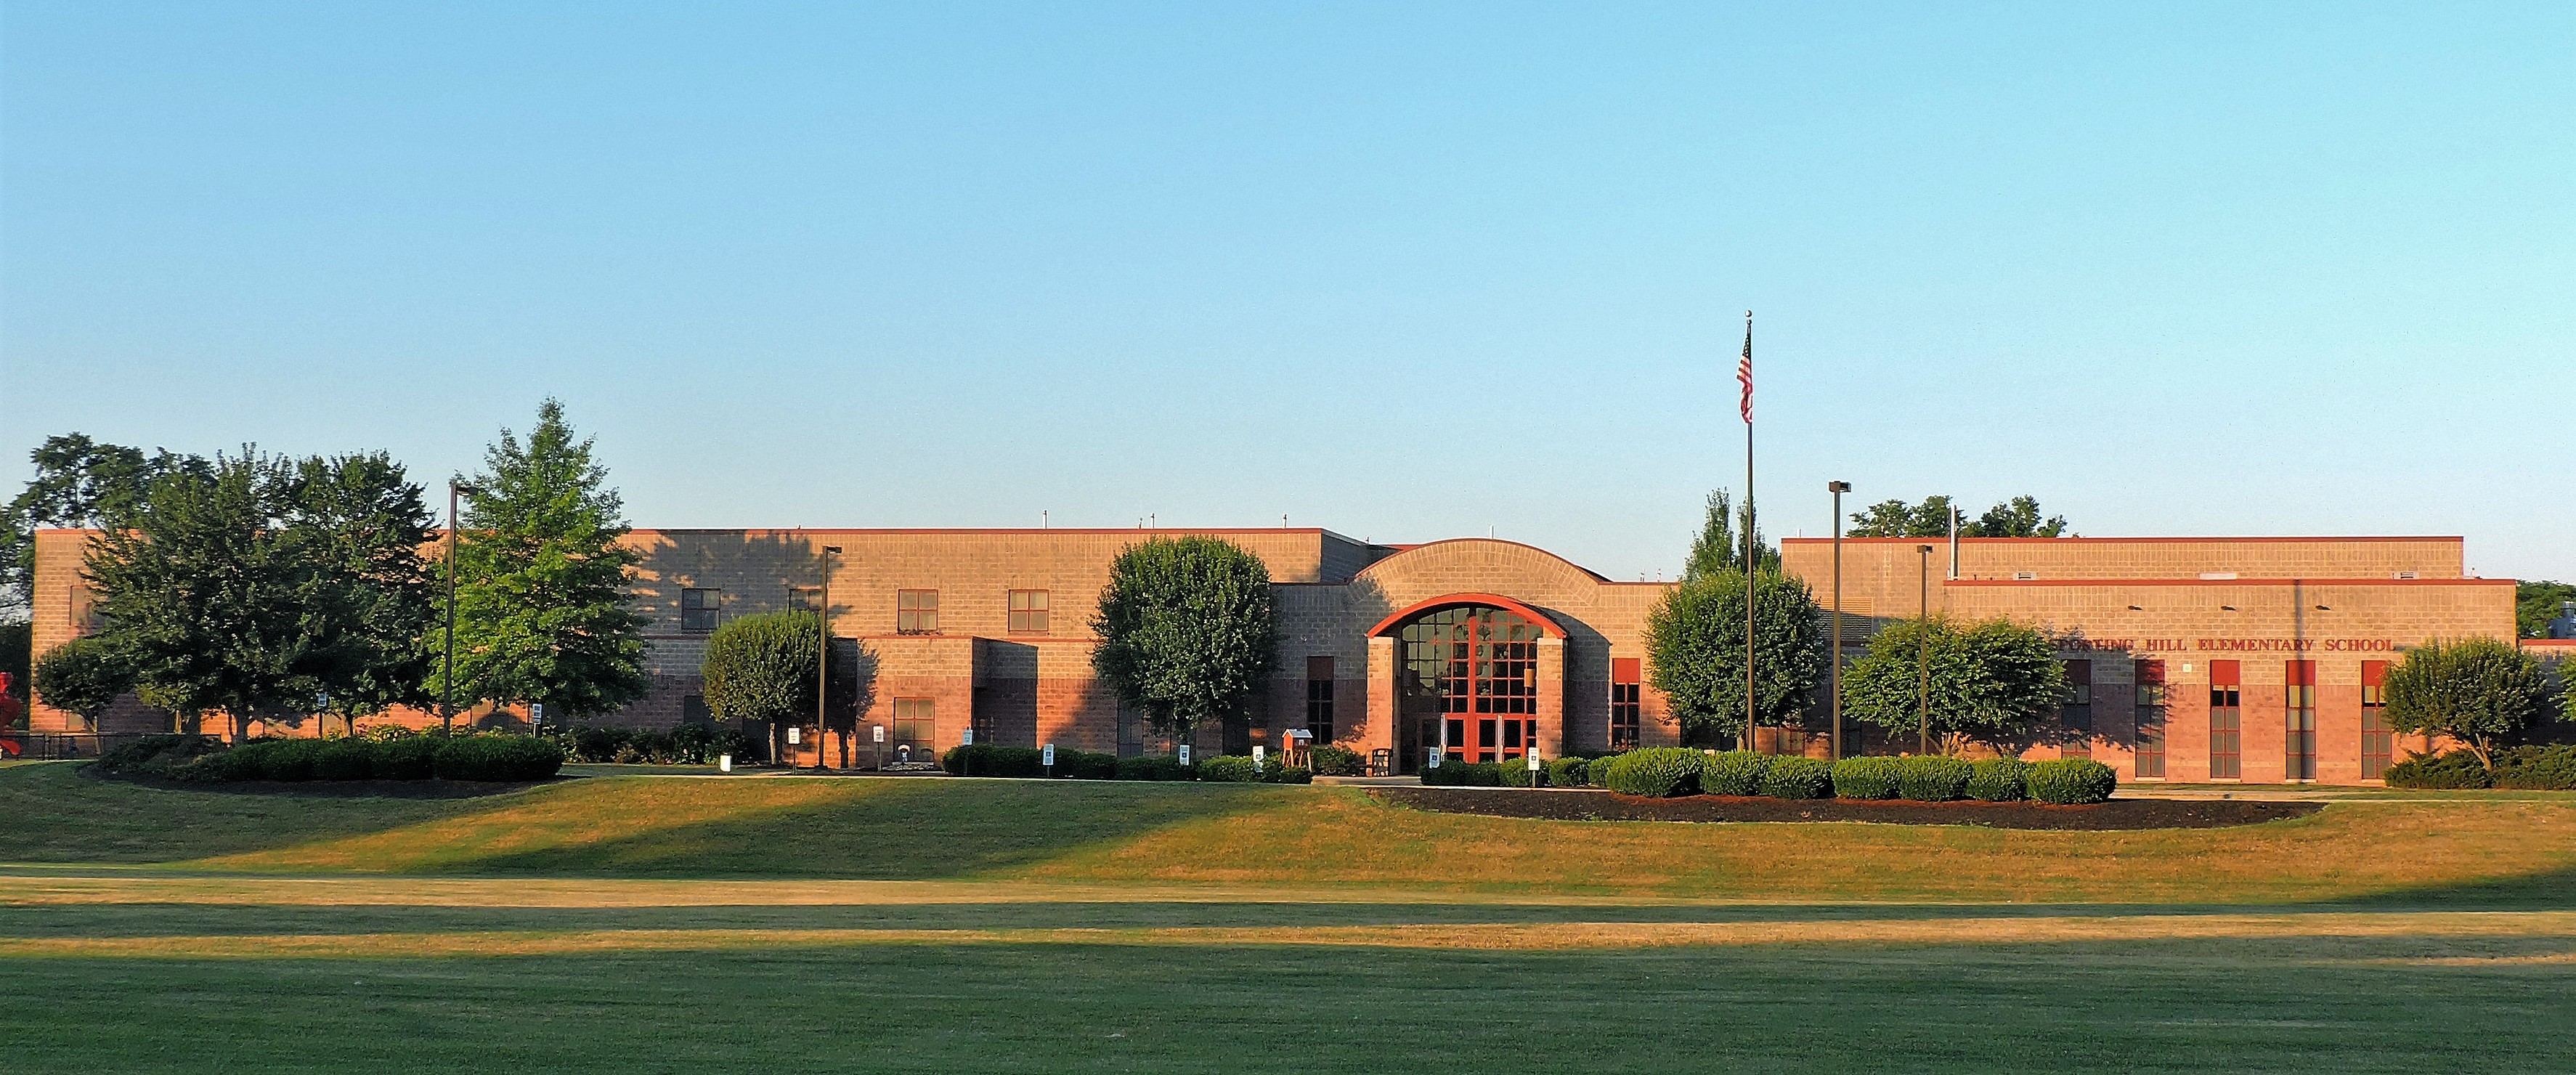 Sporting Hill Elementary